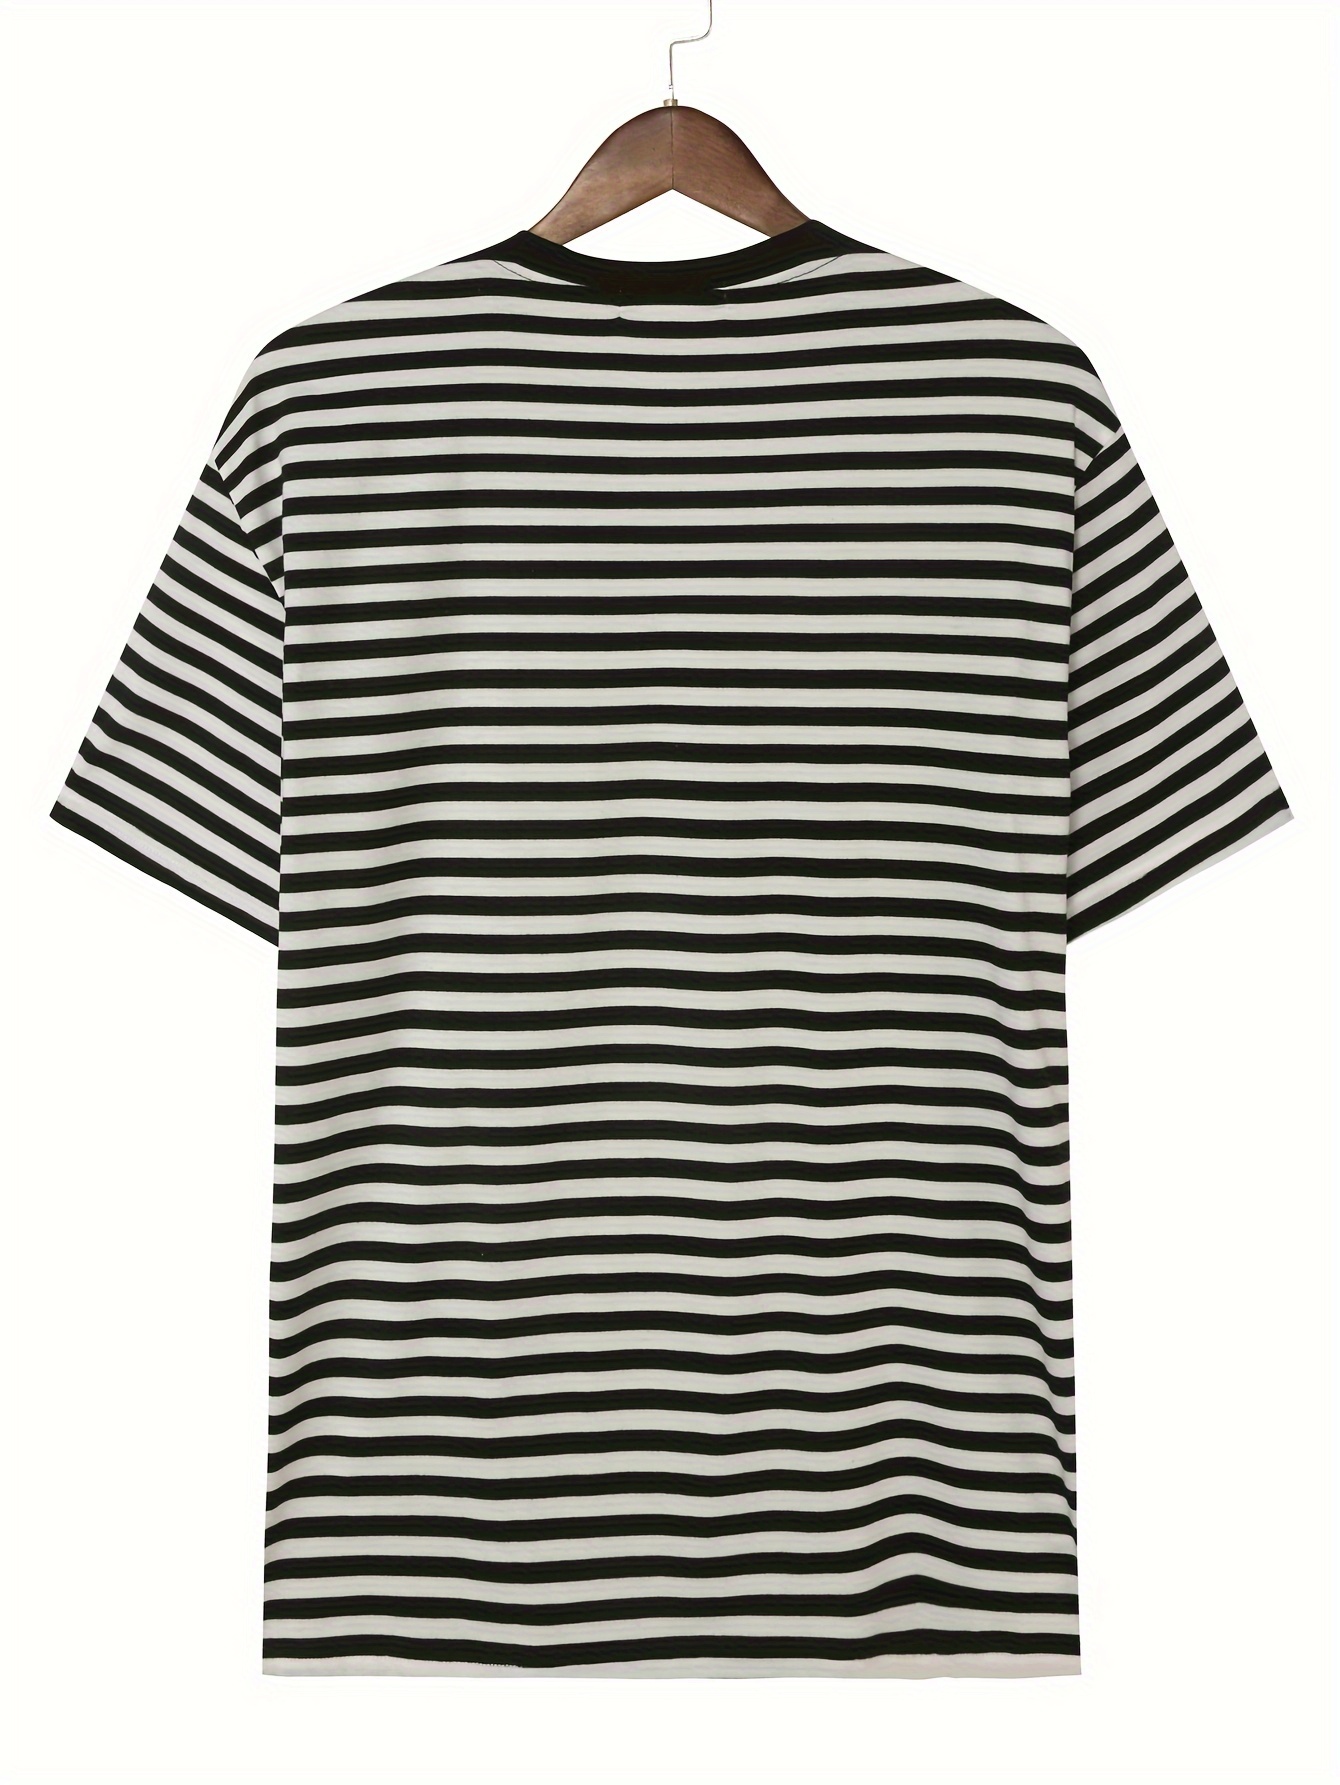 comfy t shirt, stripe pattern print mens comfy t shirt graphic tee mens summer clothes mens outfits details 0